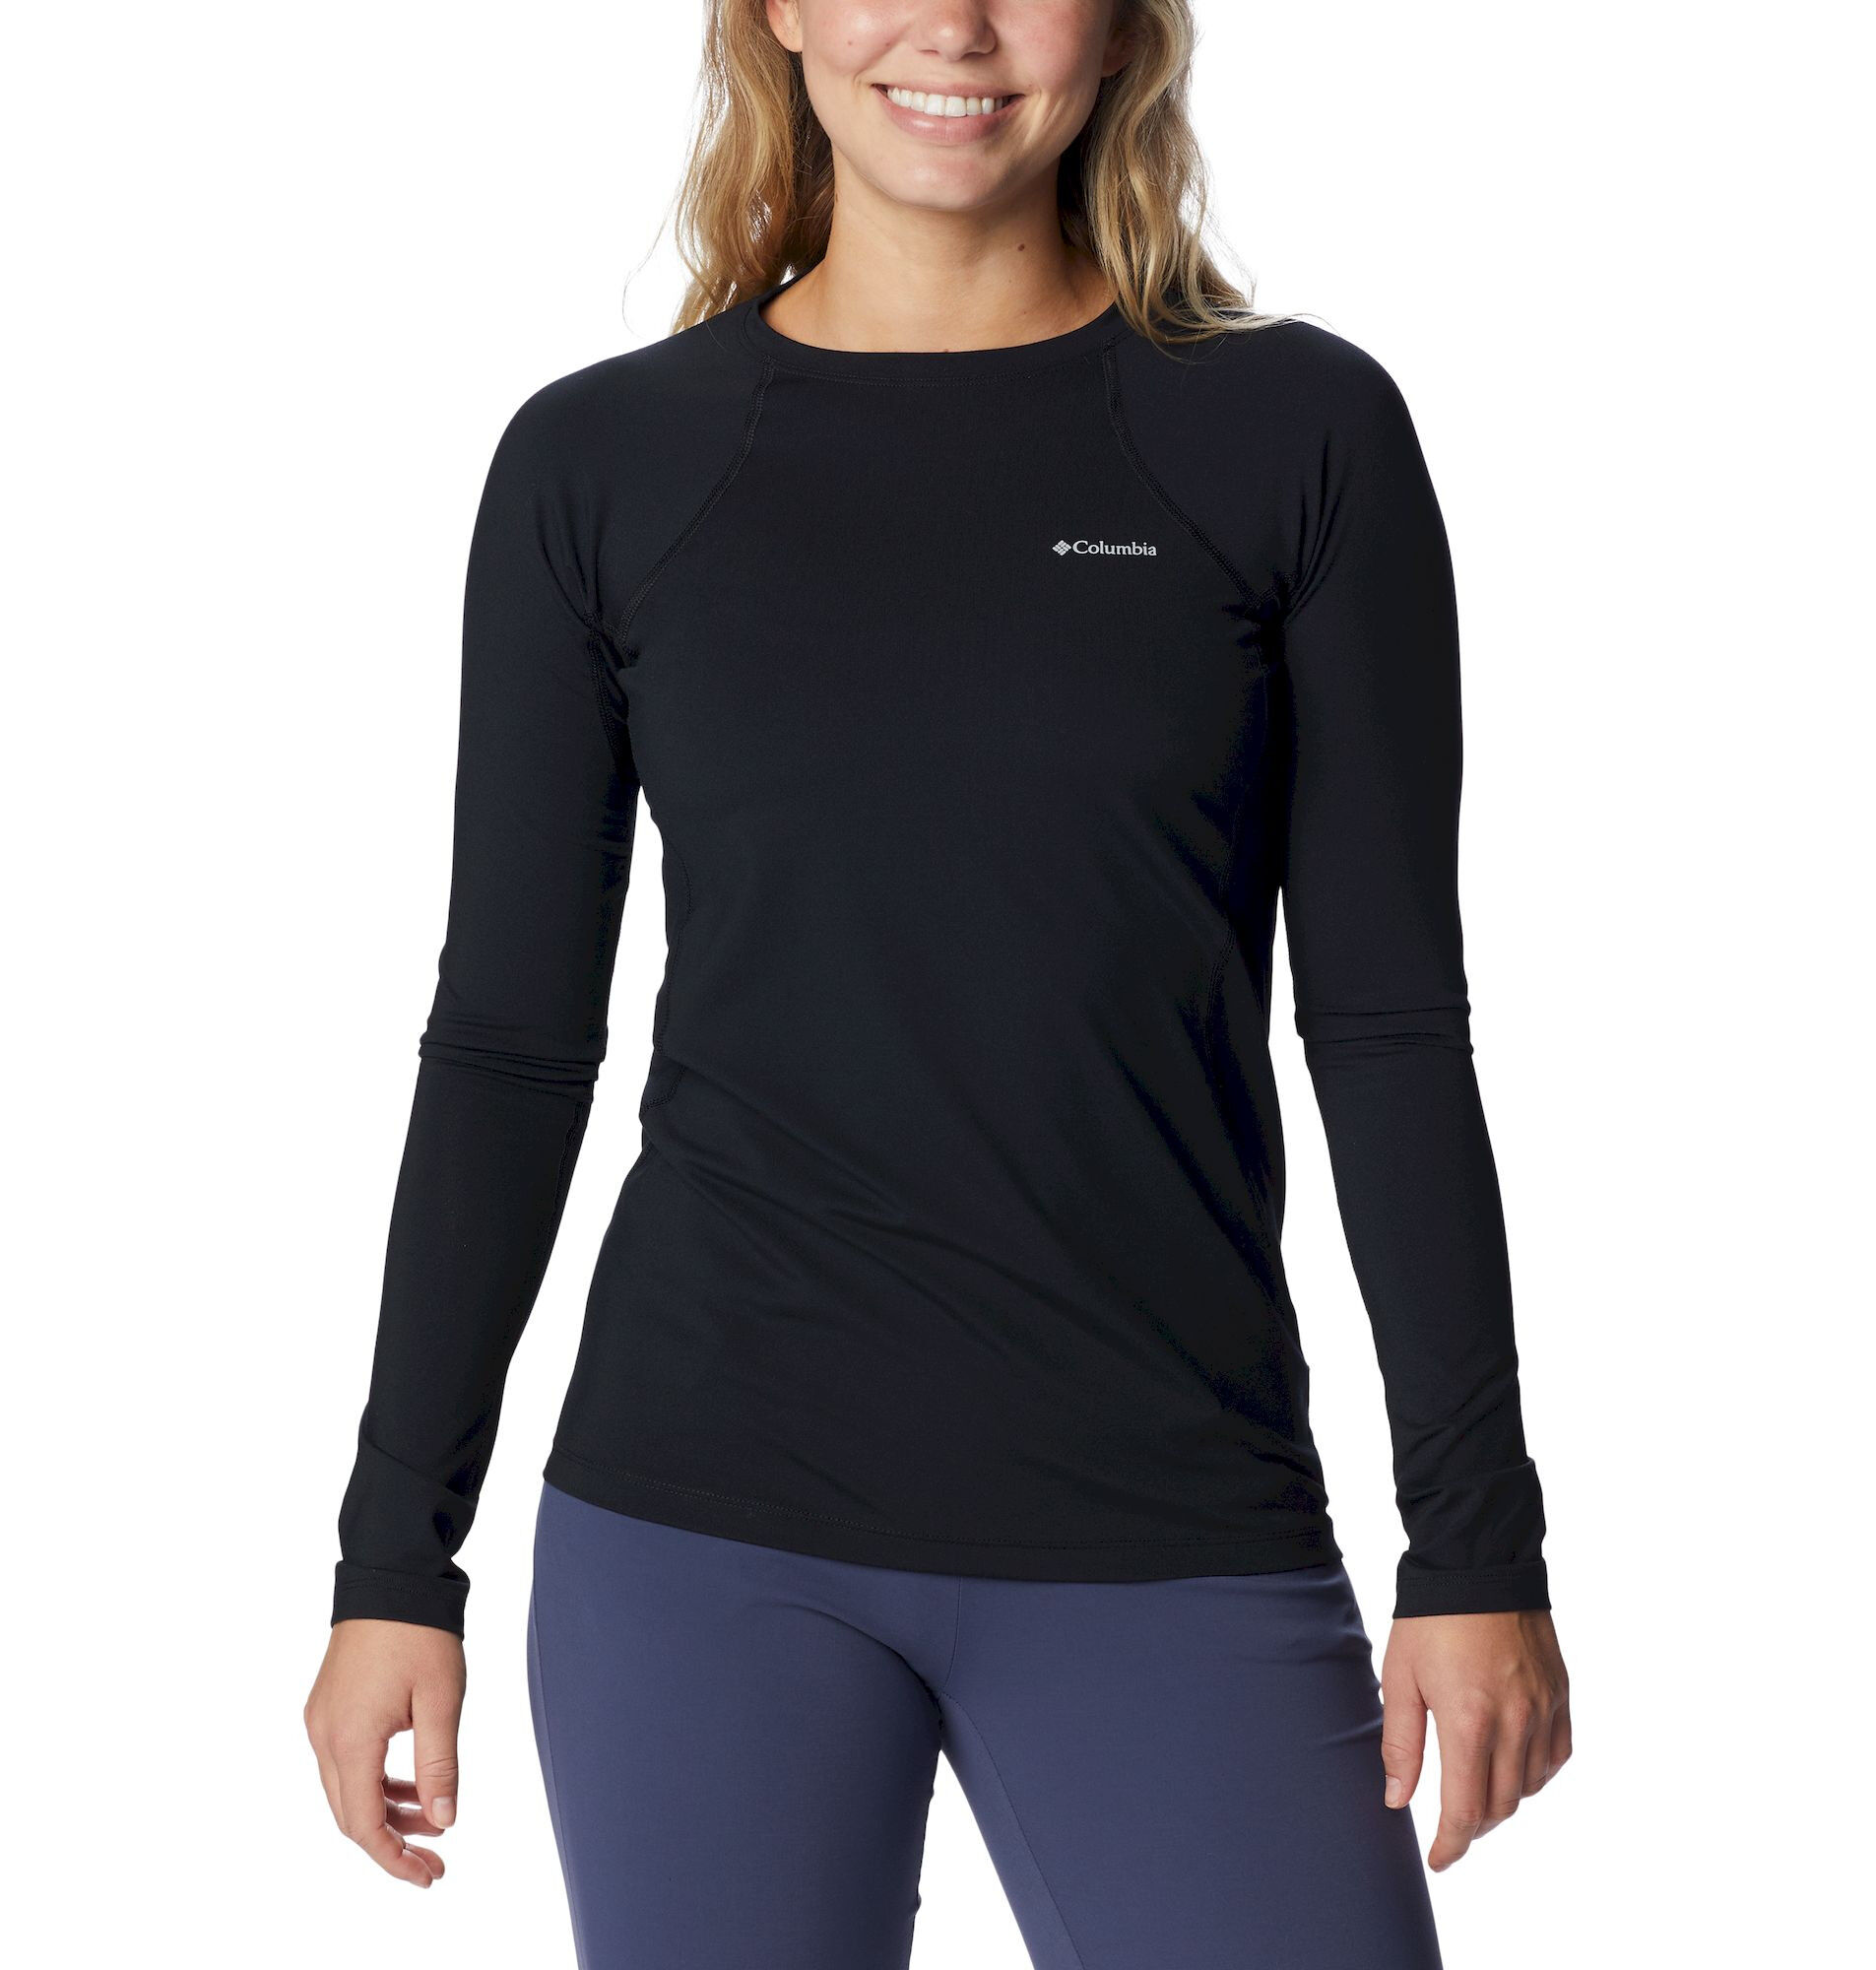 Columbia Midweight Stretch Long Sleeve Top - Intimo - Donna